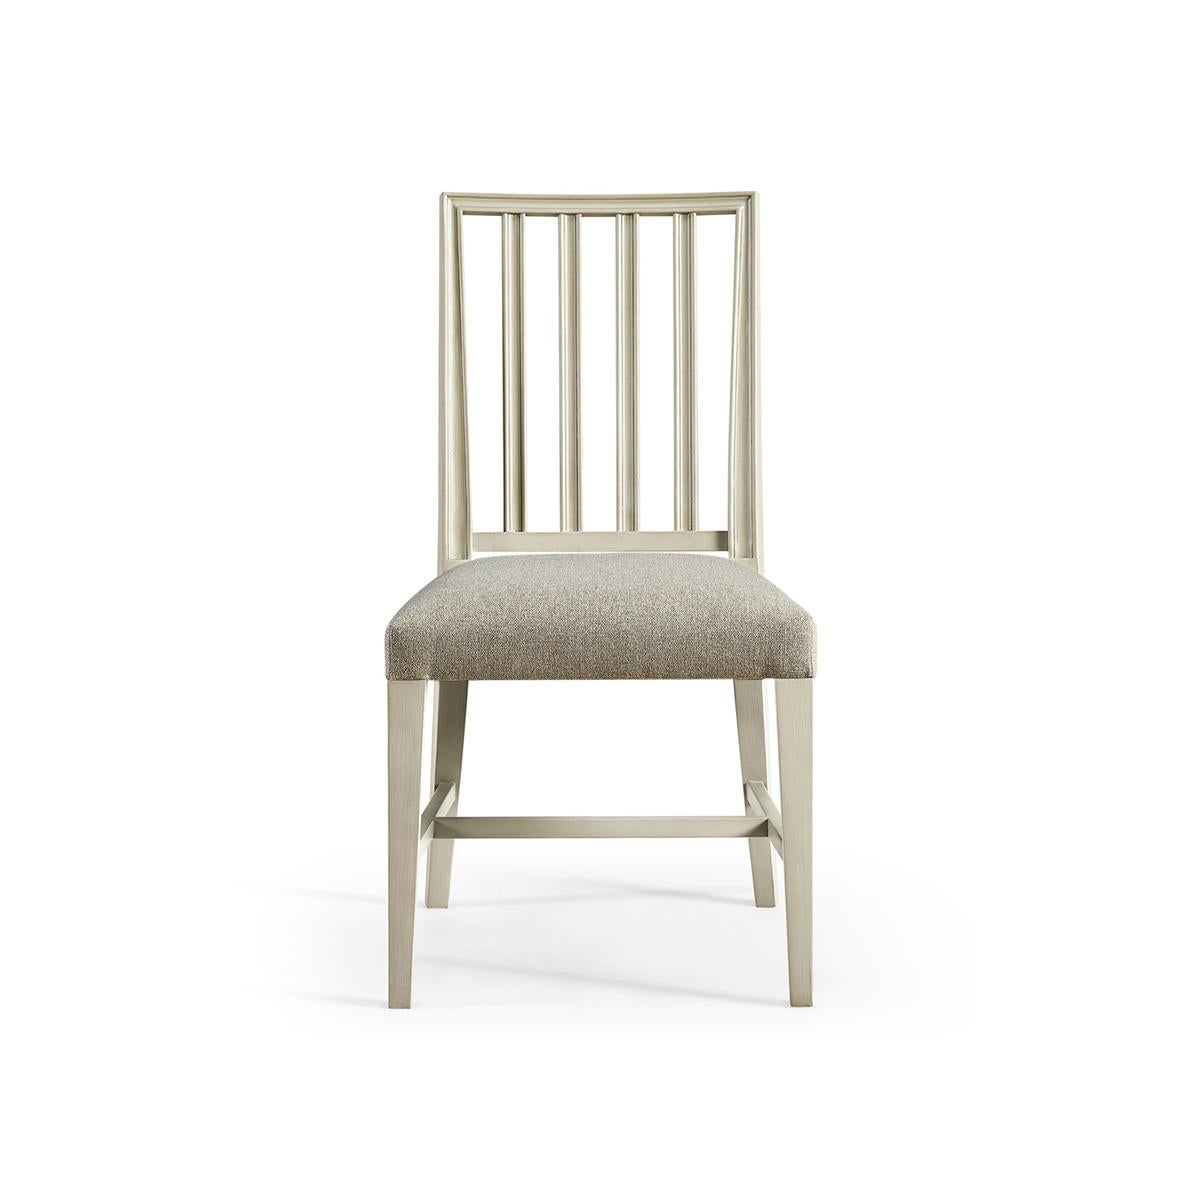 Swedish side chair in light London mist finish, with pristine forms and clean lines capable of dressing a dining space up or down with ease. With a molded slat back and a delightfully plush cushion upholstered in a creamy oatmeal performance fabric